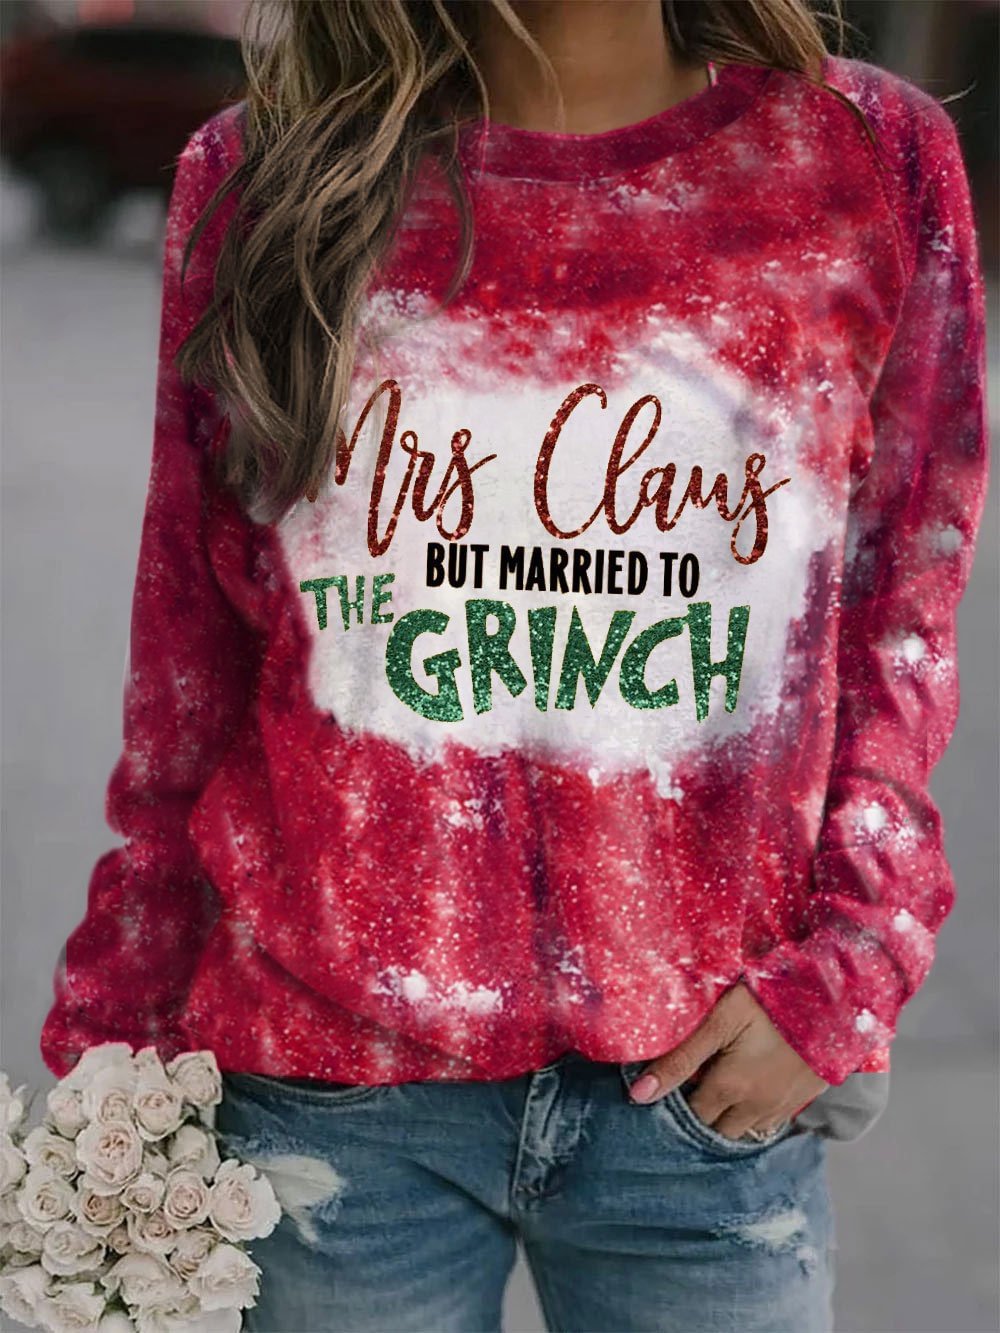 Women's Mrs. Claus But Married To The Grinch Print Sweatshirt